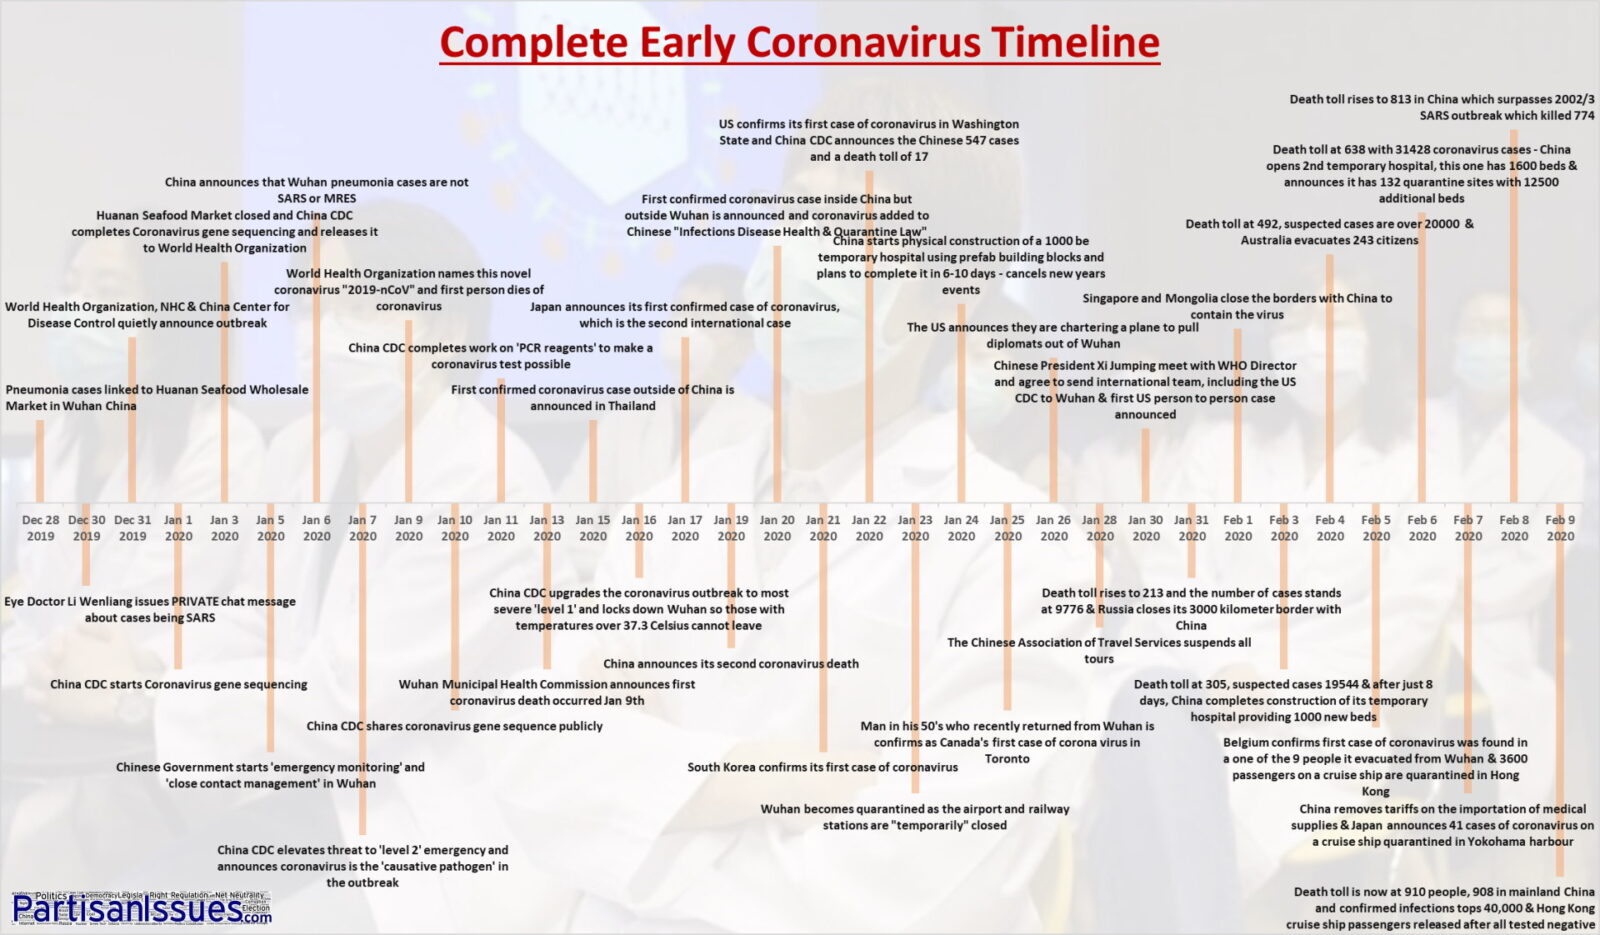 A Story of Action: The Complete Early Coronavirus Timeline